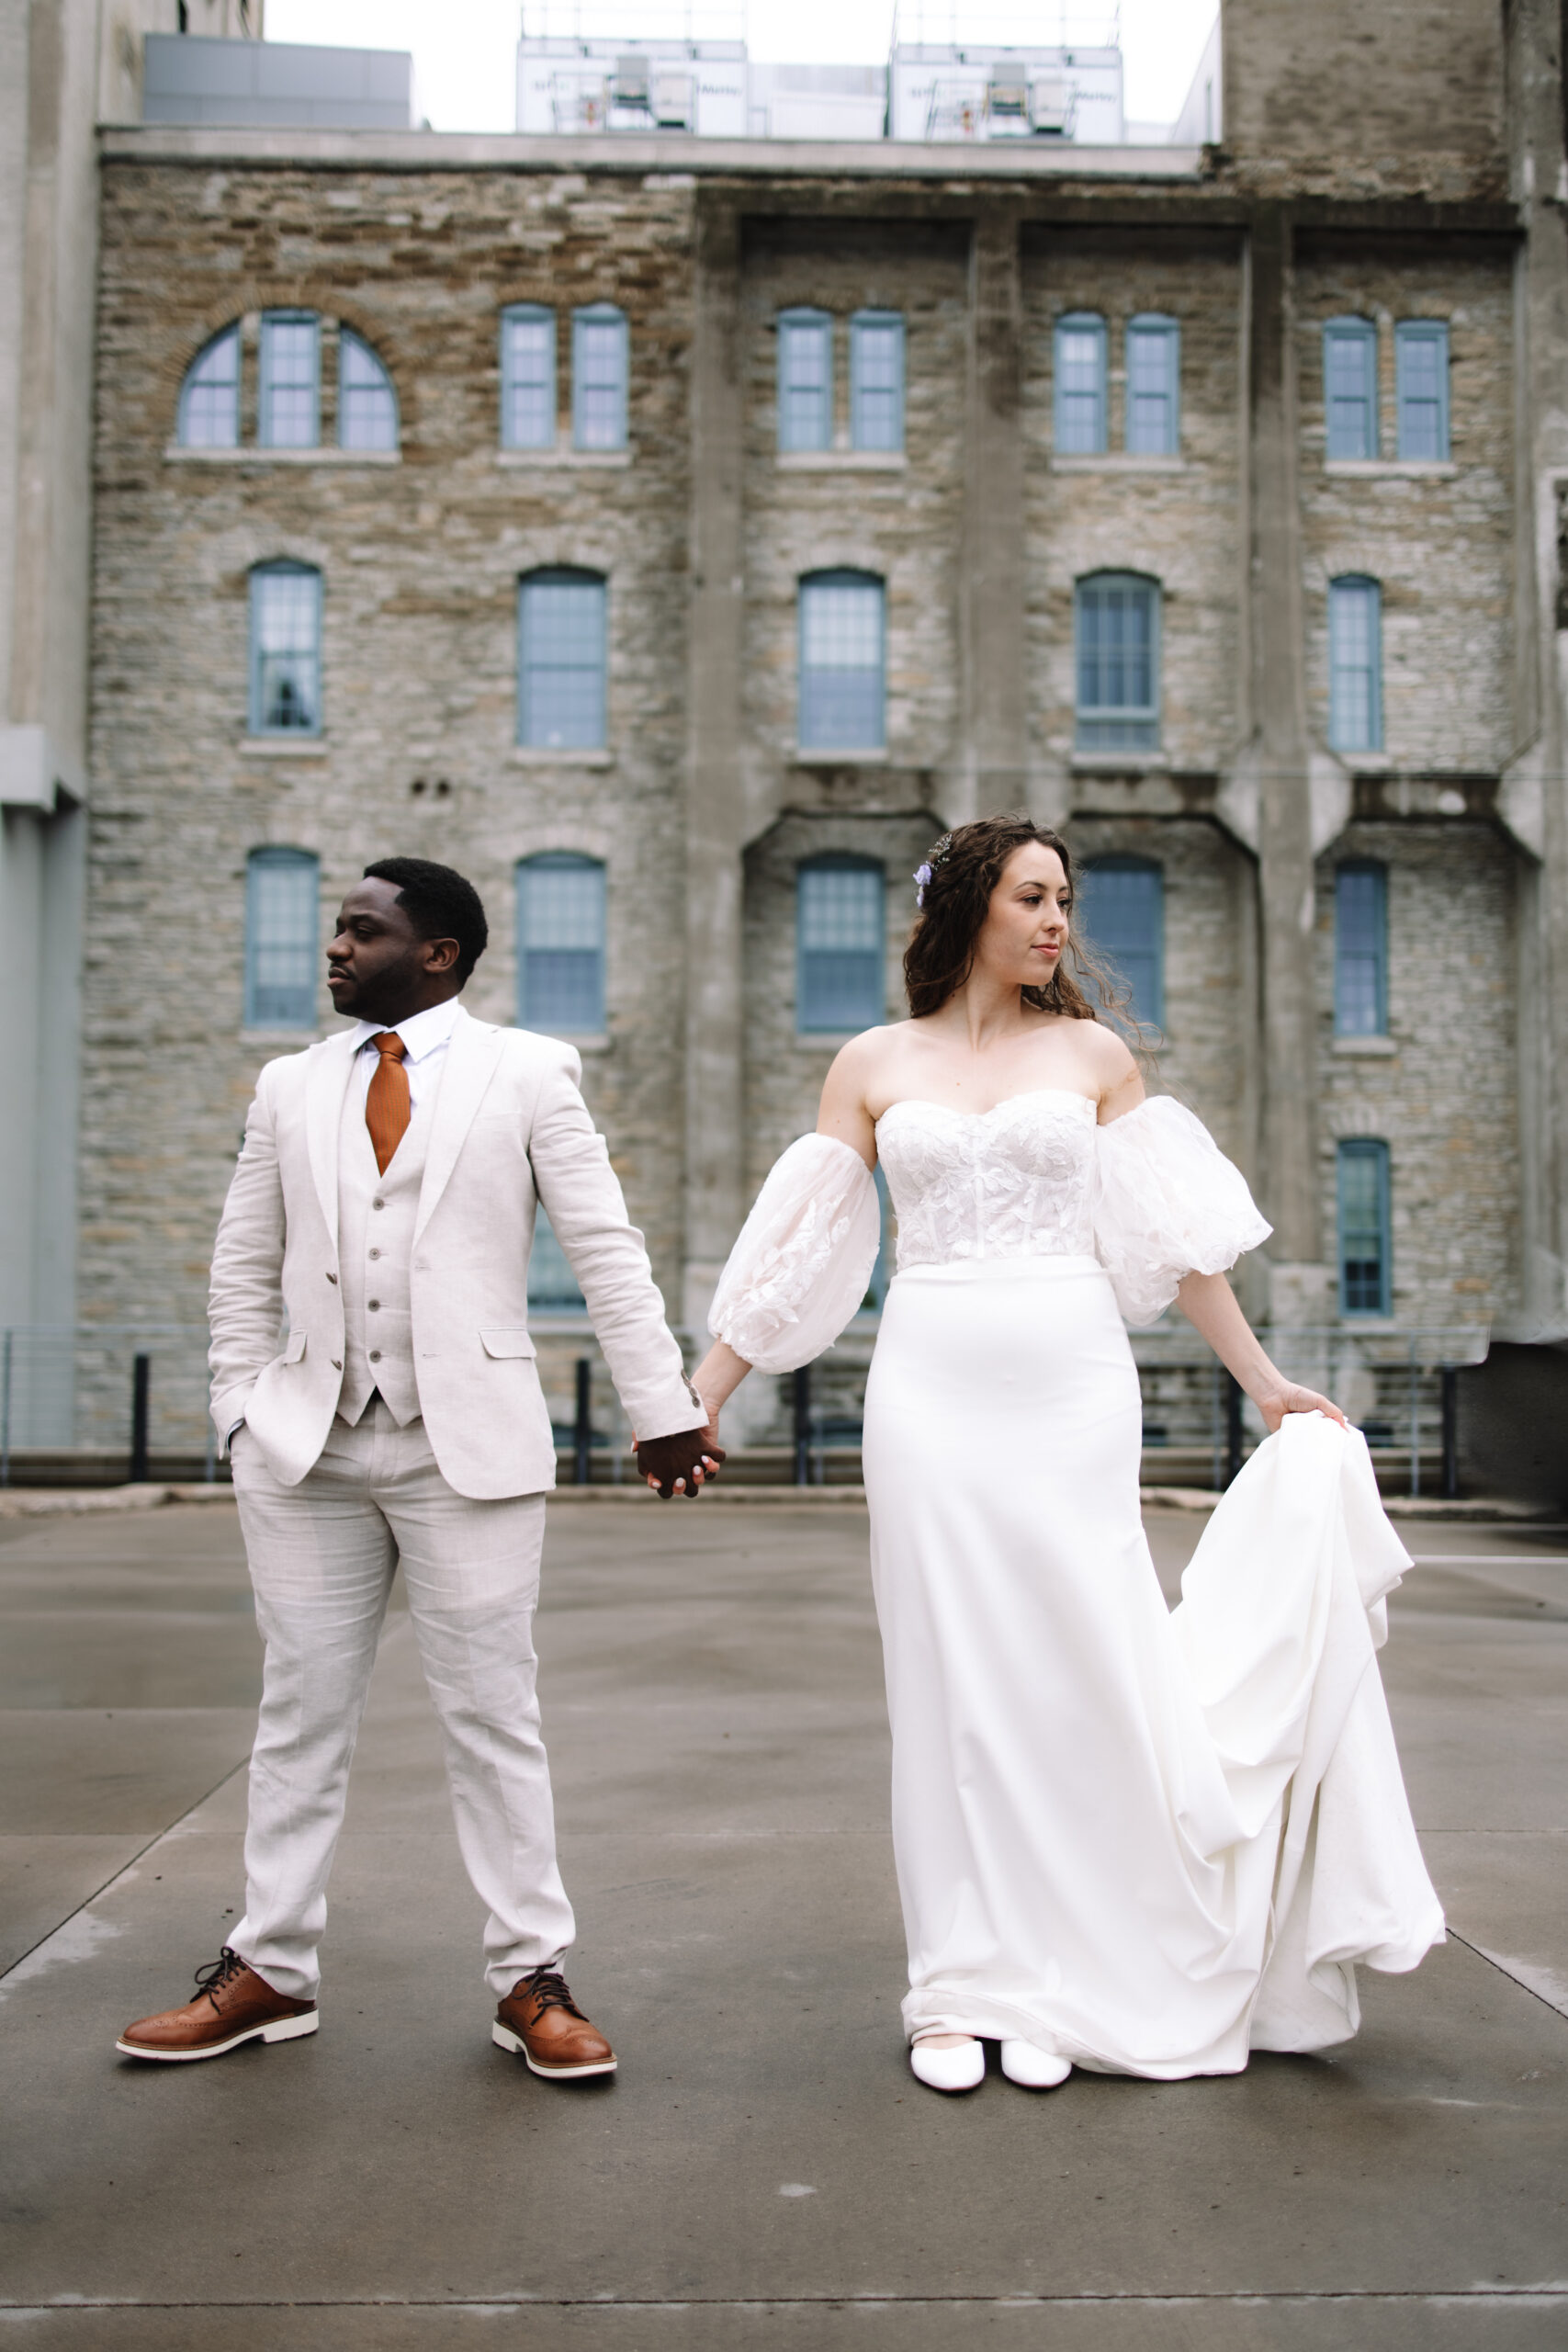 A bride in a white dress and a groom in a white suit hold hands, standing back to back in front of a stone building.